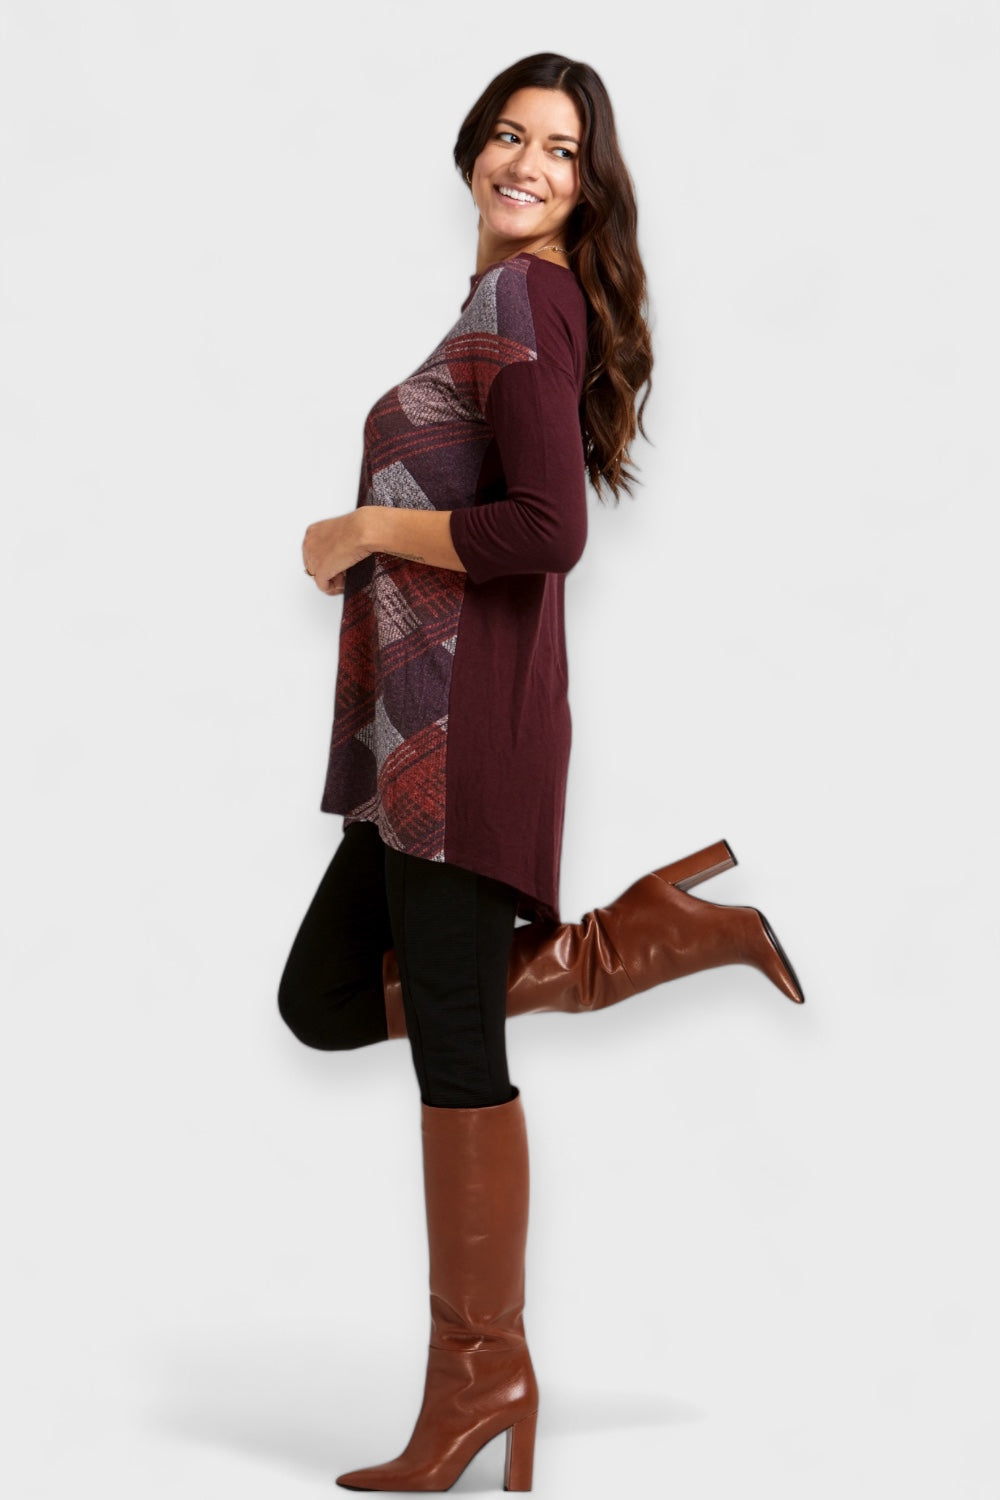 Brandy Caramel Knee High Boots  by Marco Cinosi Italian Women's Shoes Paired with Geo Print Tunic Top